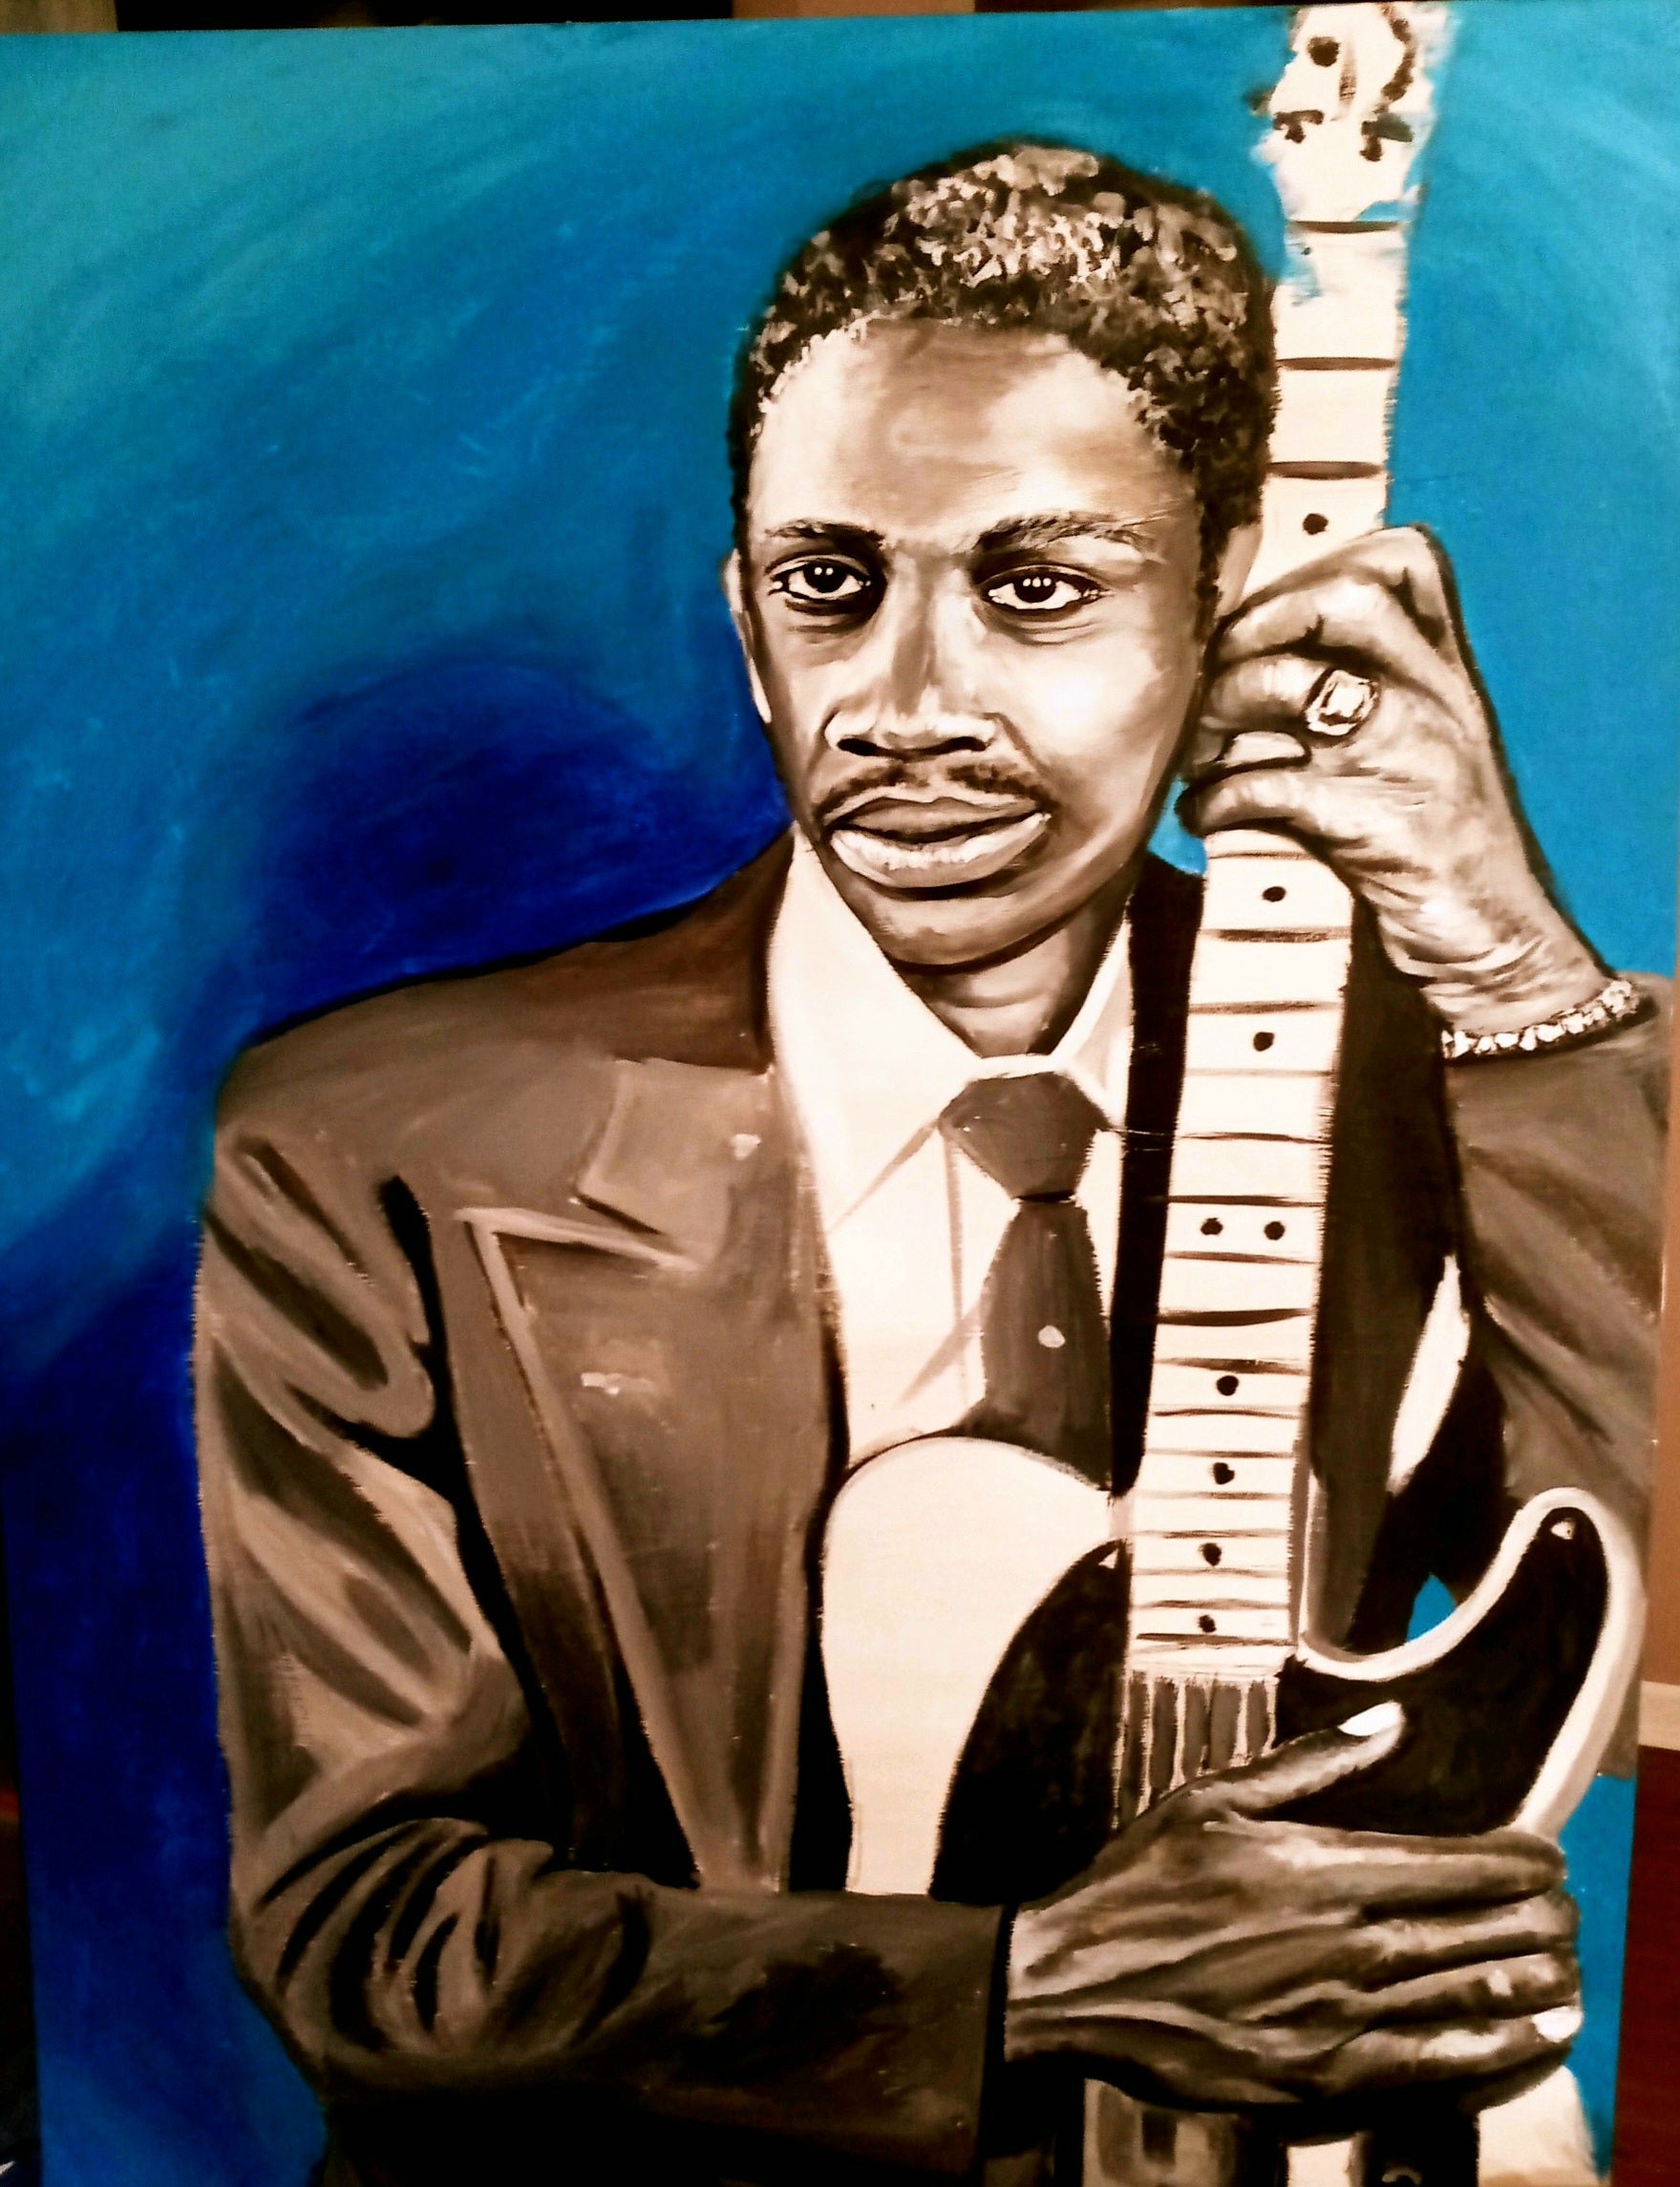 BB KING 'In the Day' Original by Emily LaForce